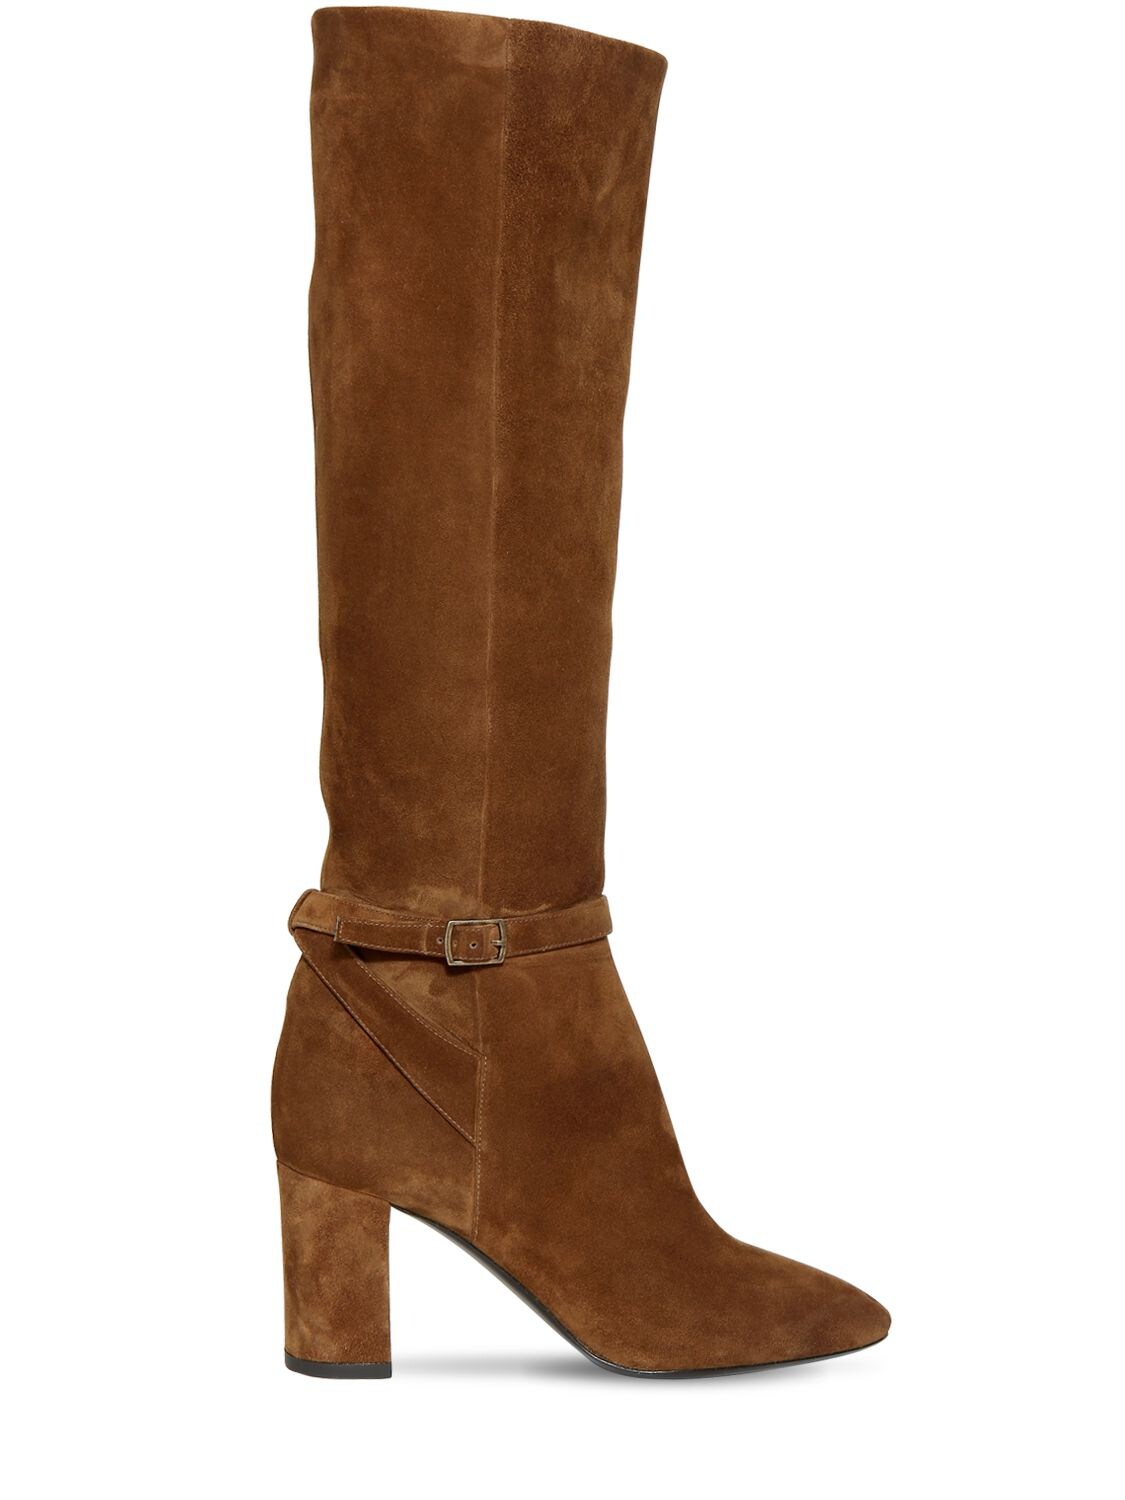 Saint Laurent 75mm Lou Suede High Boots In Tan